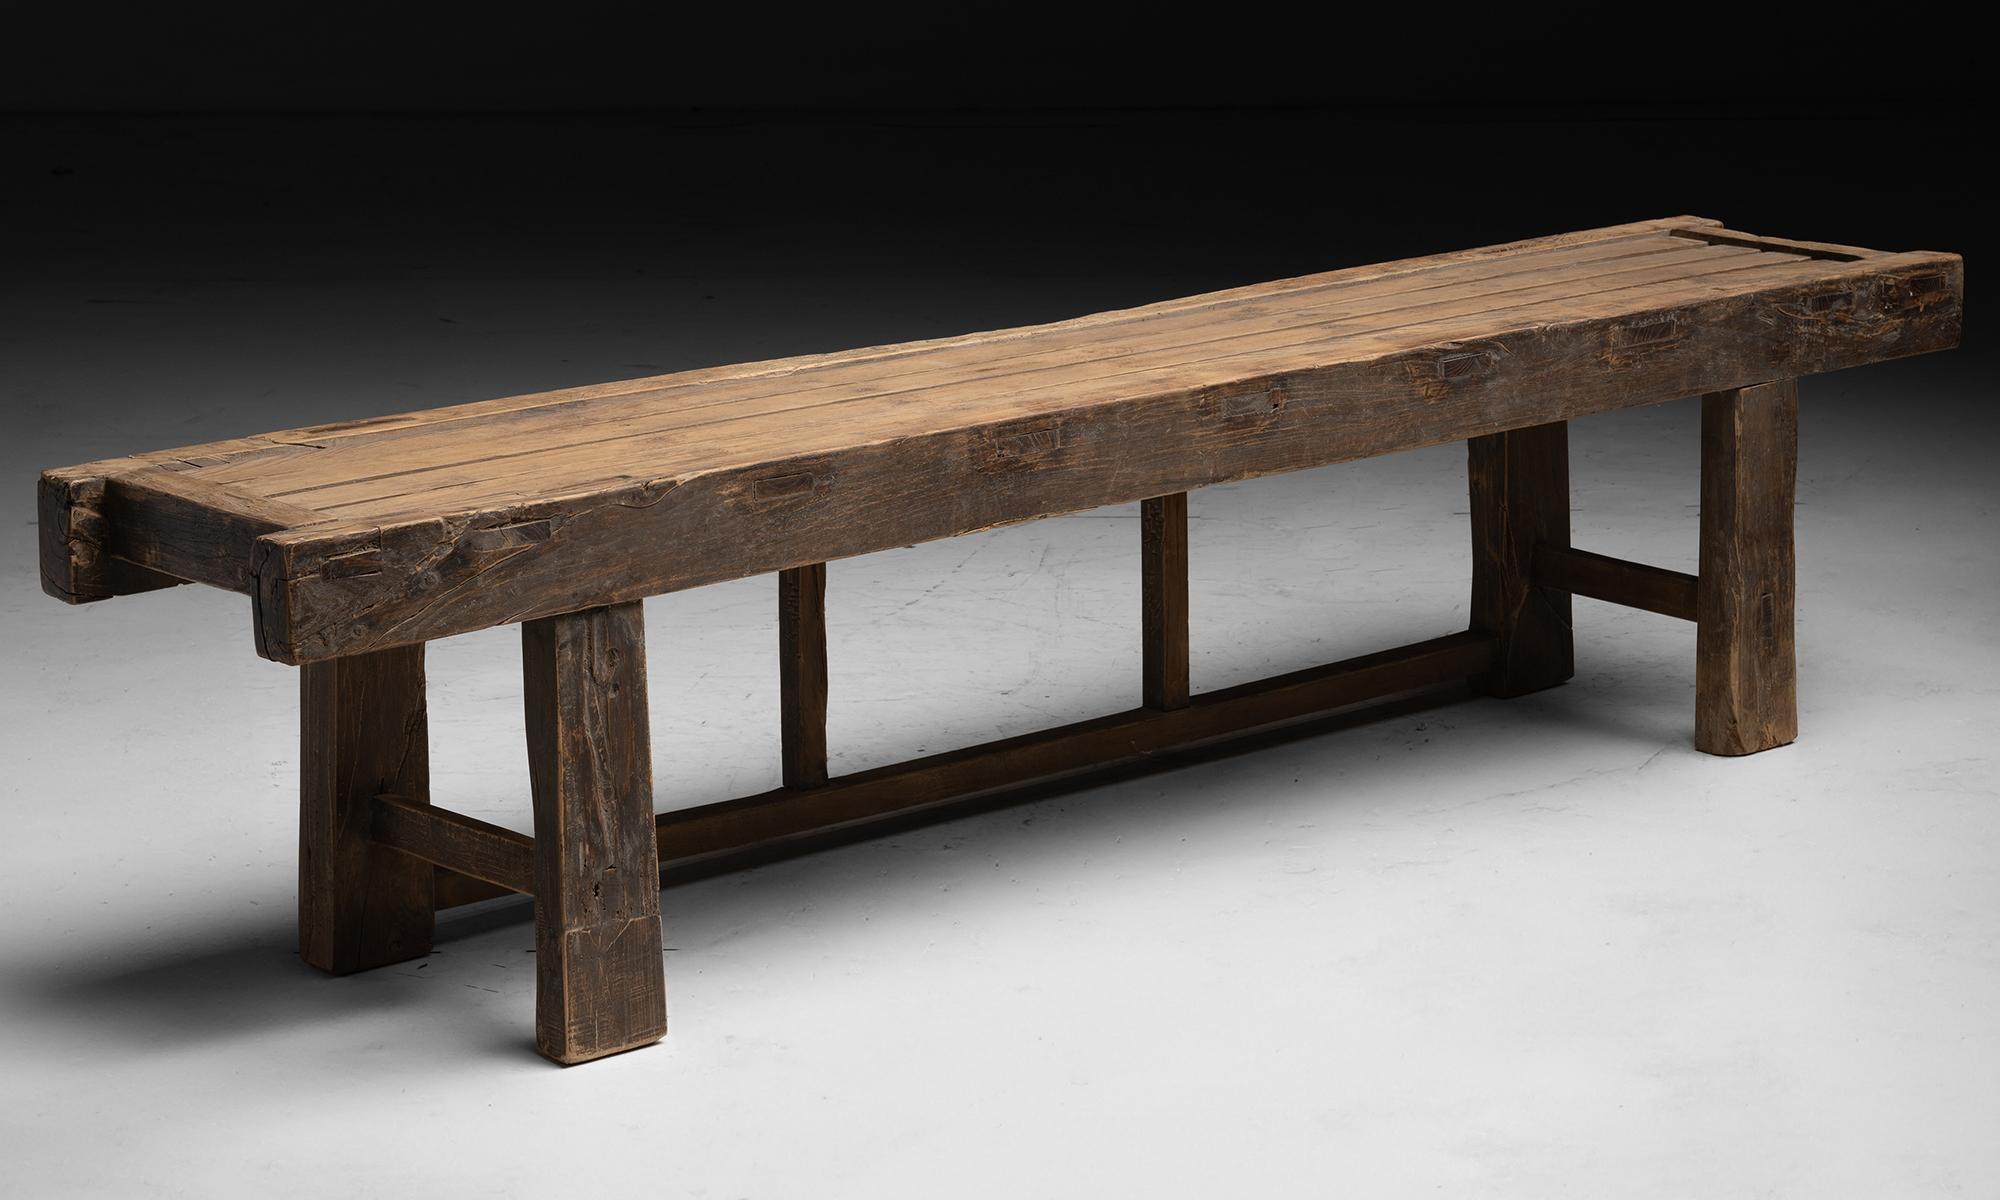 France circa 1950

Slatted bench constructed in elm, with 4 legs and frontal stretcher with beams.

83.5”L x 15.75”d x 20”h